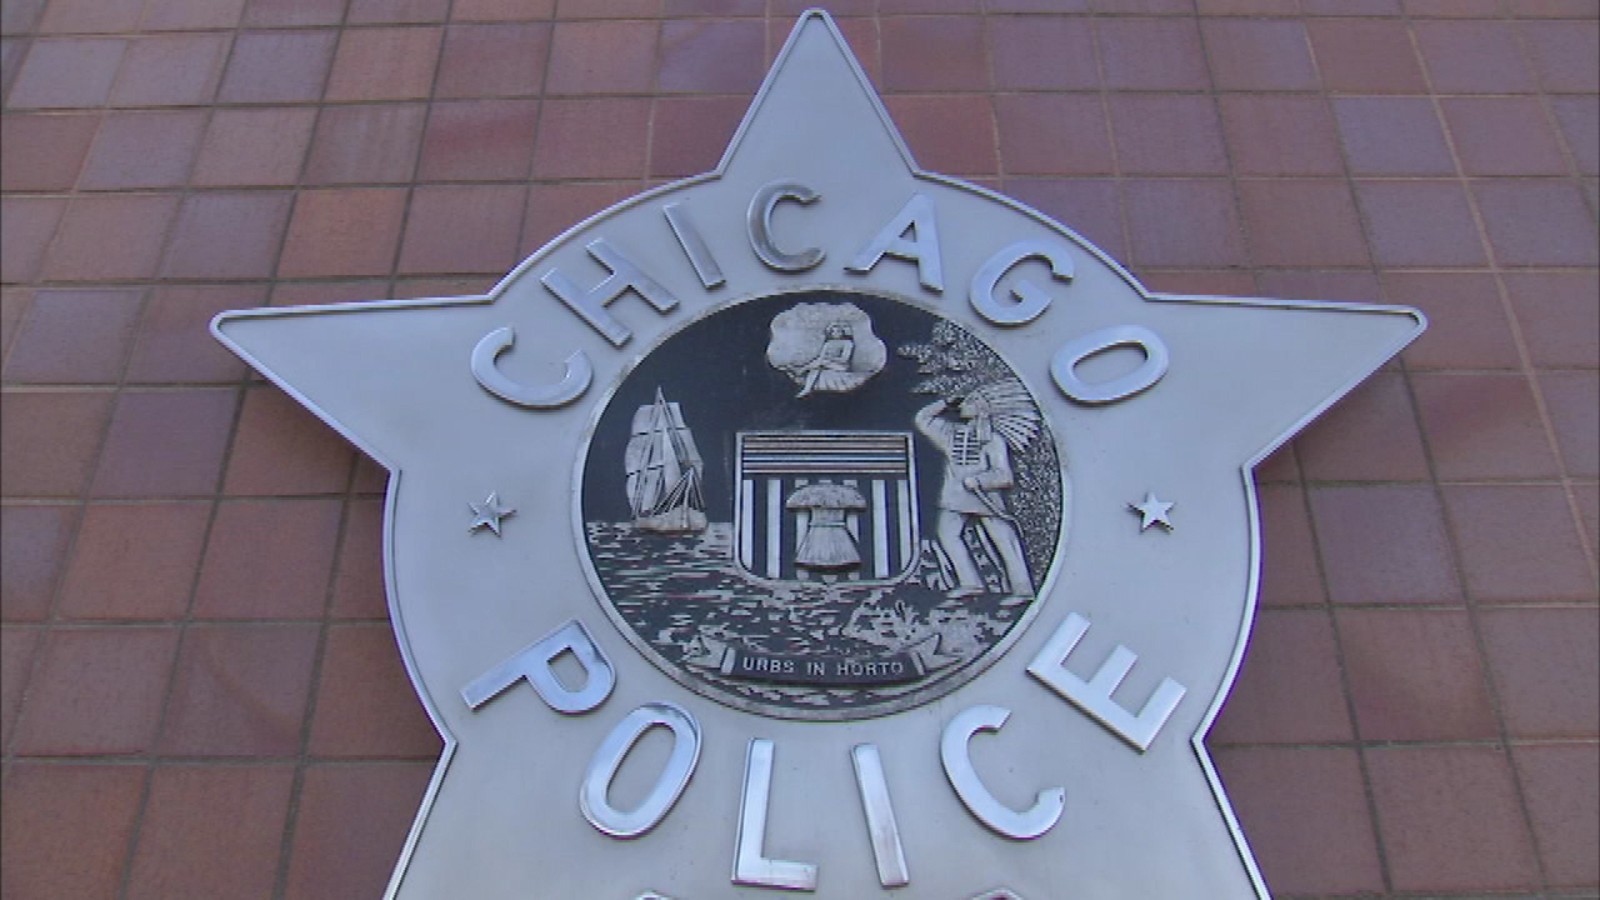 Off-duty Chicago police officer death in West Loop home is ruled suicide